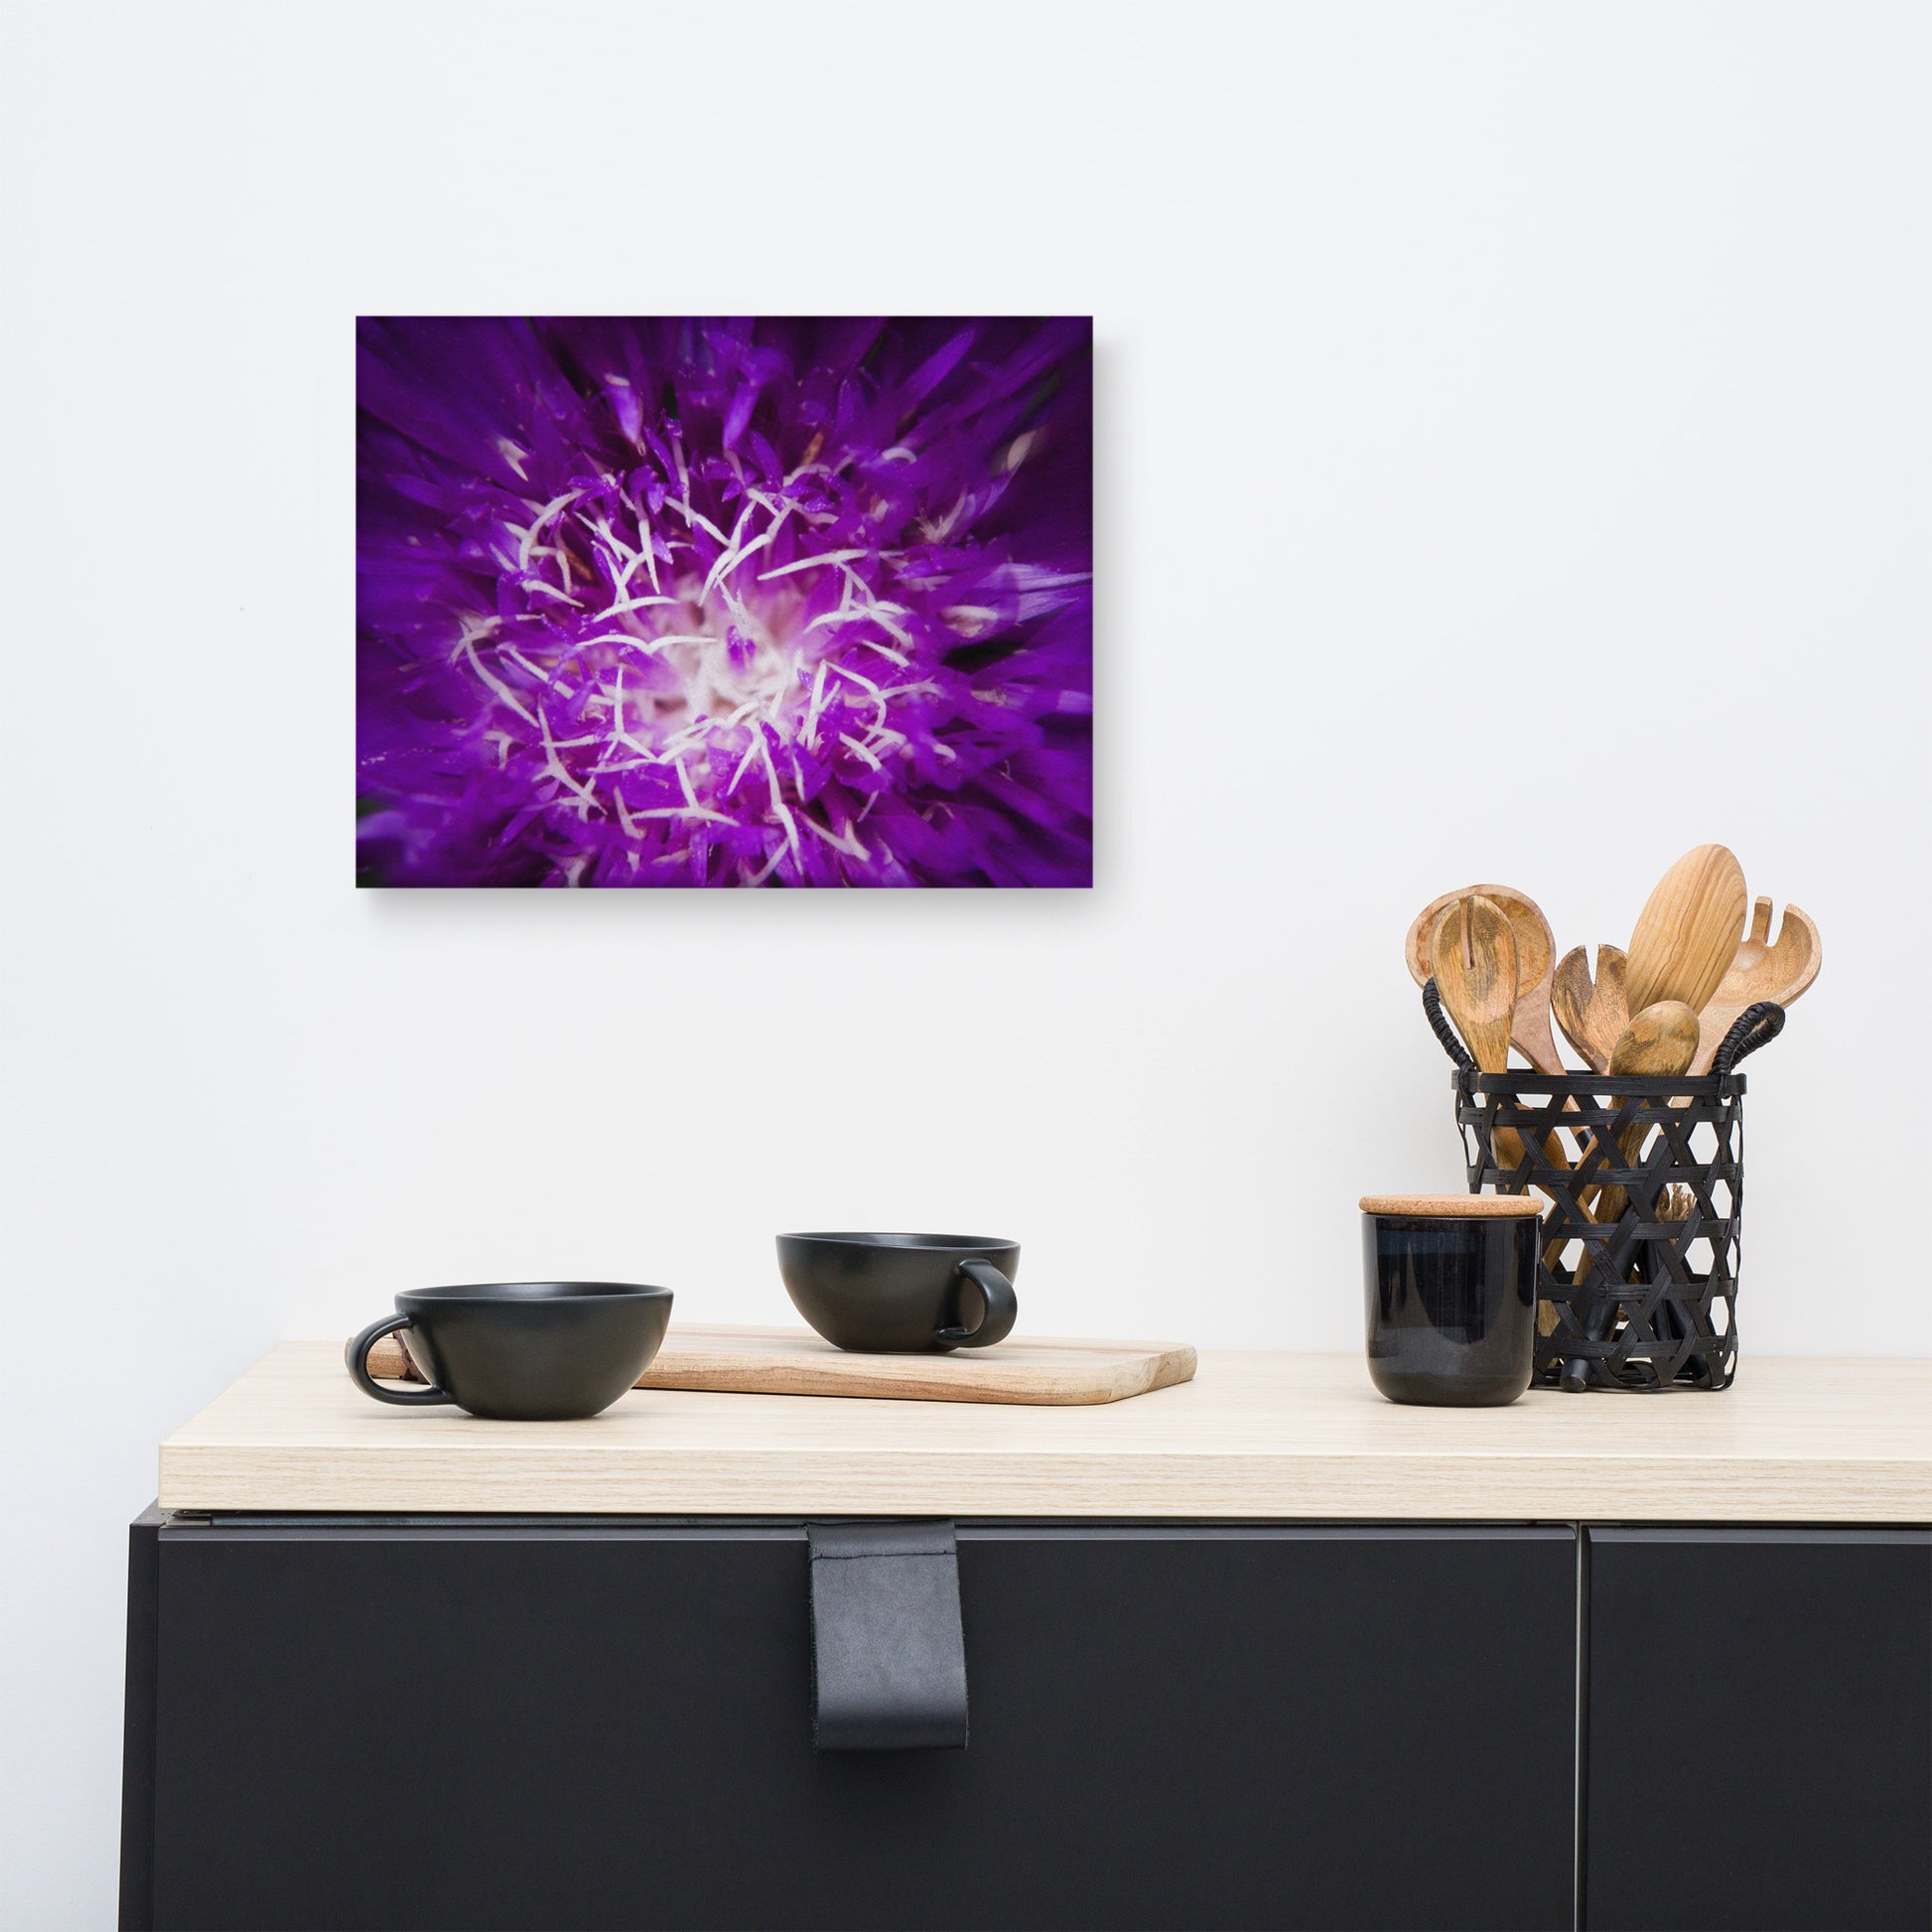 Dining Room Canvas Ideas: Dark Purple and White Aster Bloom Close-up Botanical / Floral / Flora / Flowers / Nature Photograph Canvas Wall Art Print - Artwork